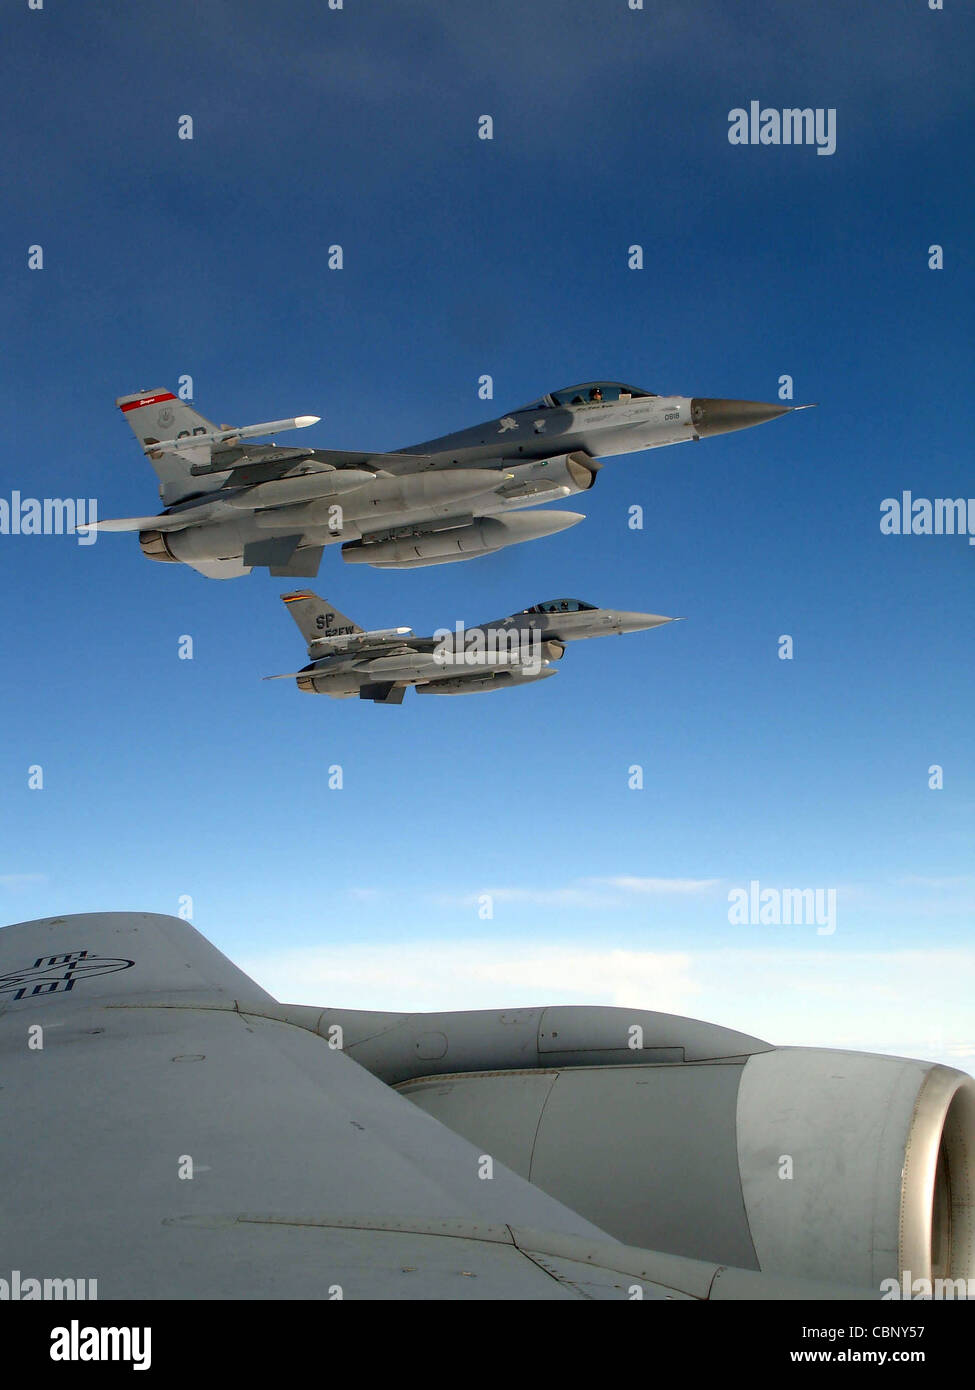 ZHUKOVSKY, Russia -- Two F-16 Fighting Falcons from Spangdahlem Air Base, Germany, await refueling from a KC-135 Stratotanker from Royal Air Force Mildenhall, England, en route to the Moscow International Aviation and Space Salon Aug. 14. About 100 servicemembers are participating in the air show Aug. 16 to 21. Stock Photo